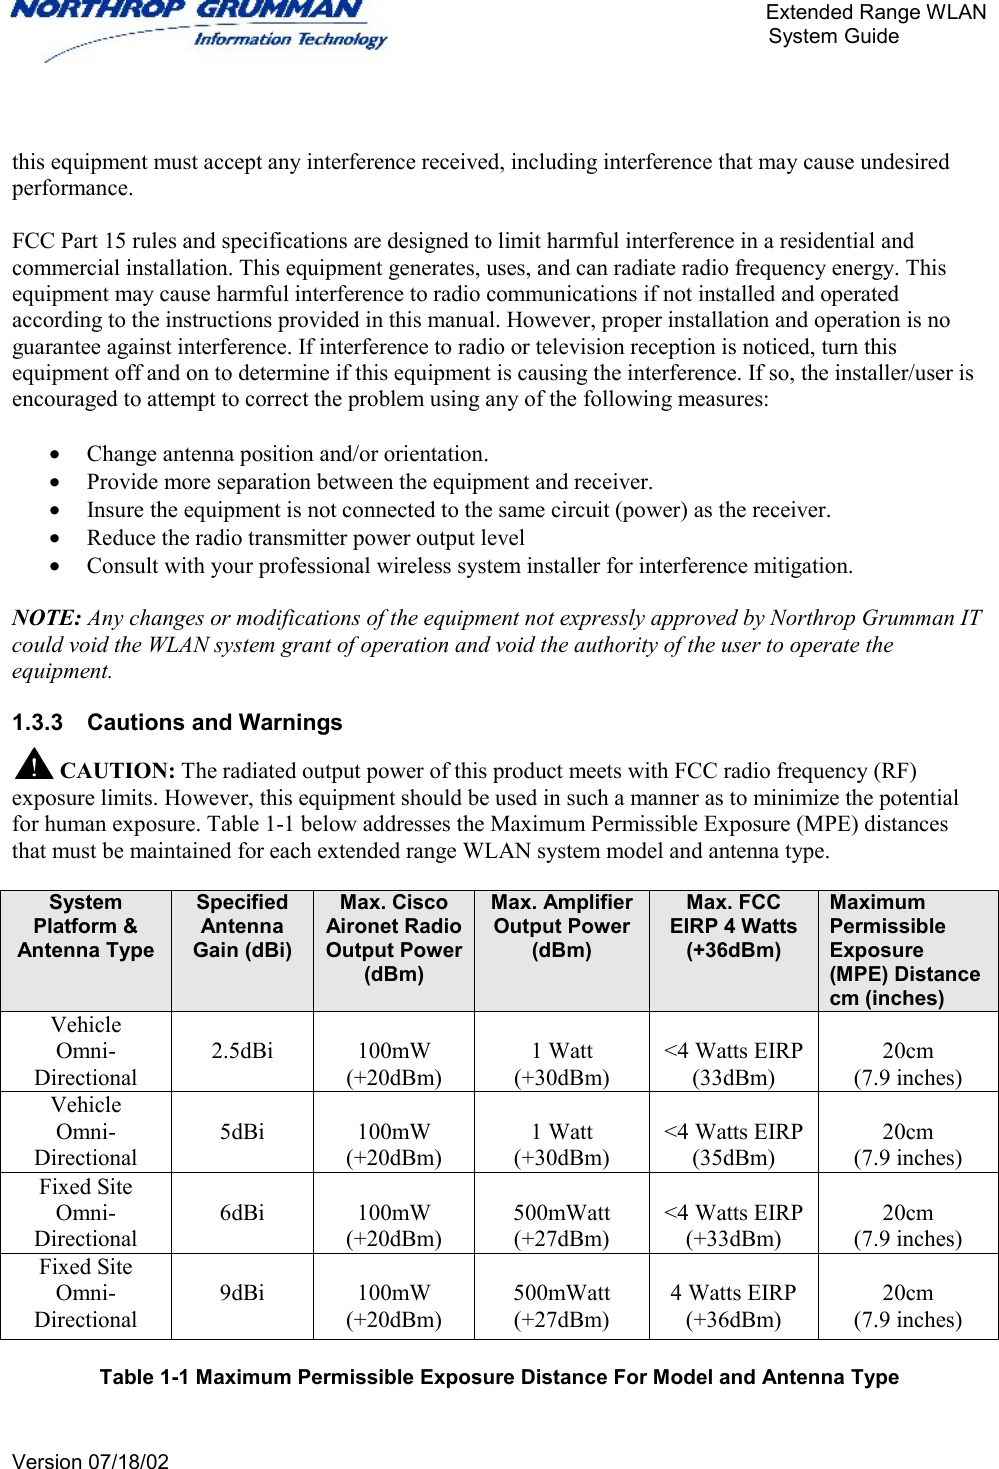       Extended Range WLAN                                                     System Guide     Version 07/18/02    this equipment must accept any interference received, including interference that may cause undesired performance.   FCC Part 15 rules and specifications are designed to limit harmful interference in a residential and commercial installation. This equipment generates, uses, and can radiate radio frequency energy. This equipment may cause harmful interference to radio communications if not installed and operated according to the instructions provided in this manual. However, proper installation and operation is no guarantee against interference. If interference to radio or television reception is noticed, turn this equipment off and on to determine if this equipment is causing the interference. If so, the installer/user is encouraged to attempt to correct the problem using any of the following measures:  •  Change antenna position and/or orientation. •  Provide more separation between the equipment and receiver. •  Insure the equipment is not connected to the same circuit (power) as the receiver. •  Reduce the radio transmitter power output level •  Consult with your professional wireless system installer for interference mitigation.  NOTE: Any changes or modifications of the equipment not expressly approved by Northrop Grumman IT could void the WLAN system grant of operation and void the authority of the user to operate the equipment. 1.3.3  Cautions and Warnings  CAUTION: The radiated output power of this product meets with FCC radio frequency (RF) exposure limits. However, this equipment should be used in such a manner as to minimize the potential for human exposure. Table 1-1 below addresses the Maximum Permissible Exposure (MPE) distances that must be maintained for each extended range WLAN system model and antenna type.  System Platform &amp; Antenna Type Specified Antenna Gain (dBi) Max. Cisco Aironet Radio Output Power (dBm) Max. Amplifier Output Power (dBm) Max. FCC EIRP 4 Watts  (+36dBm) Maximum Permissible Exposure (MPE) Distance cm (inches) Vehicle Omni-Directional  2.5dBi  100mW (+20dBm)  1 Watt (+30dBm)  &lt;4 Watts EIRP (33dBm)  20cm (7.9 inches) Vehicle Omni-Directional  5dBi  100mW (+20dBm)  1 Watt (+30dBm)  &lt;4 Watts EIRP (35dBm)  20cm (7.9 inches) Fixed Site Omni-Directional  6dBi  100mW (+20dBm)  500mWatt (+27dBm)  &lt;4 Watts EIRP (+33dBm)  20cm (7.9 inches) Fixed Site Omni-Directional  9dBi  100mW (+20dBm)  500mWatt (+27dBm)  4 Watts EIRP (+36dBm)  20cm (7.9 inches)  Table 1-1 Maximum Permissible Exposure Distance For Model and Antenna Type   